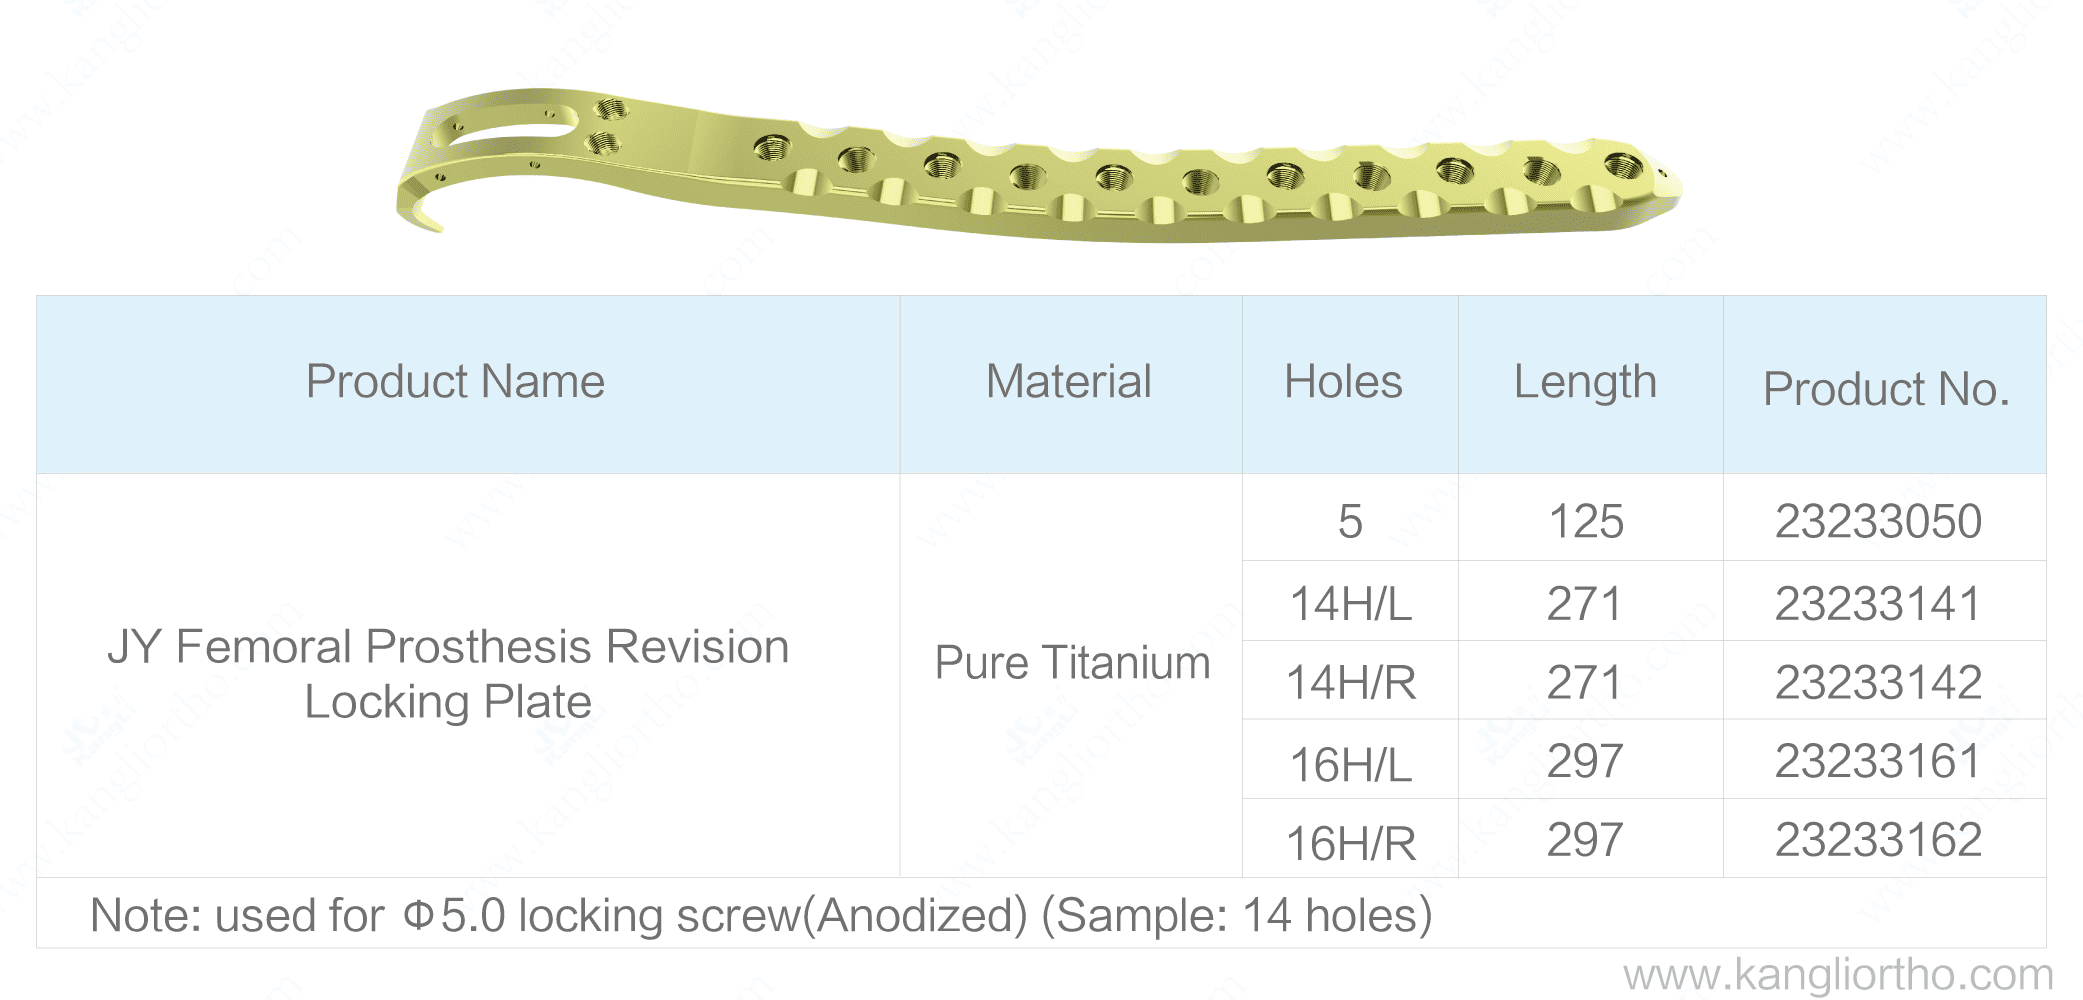 jy-femoral-prosthesis-revision-locking-plate-specifications